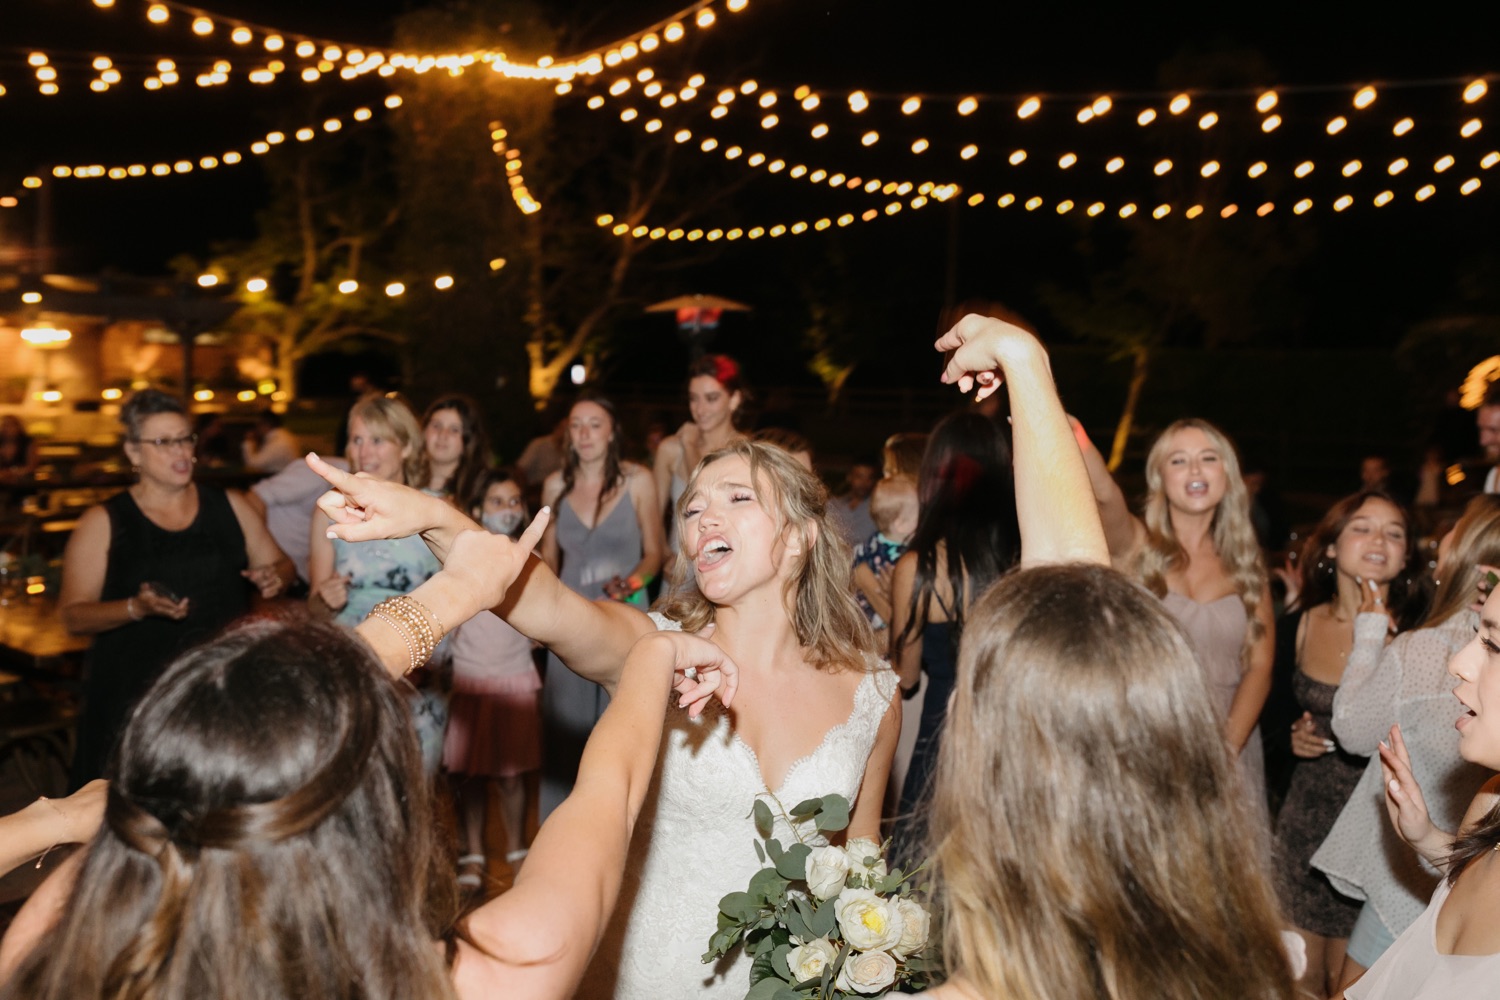 bride having fun and singing with her bridesmaids at their wedding reception